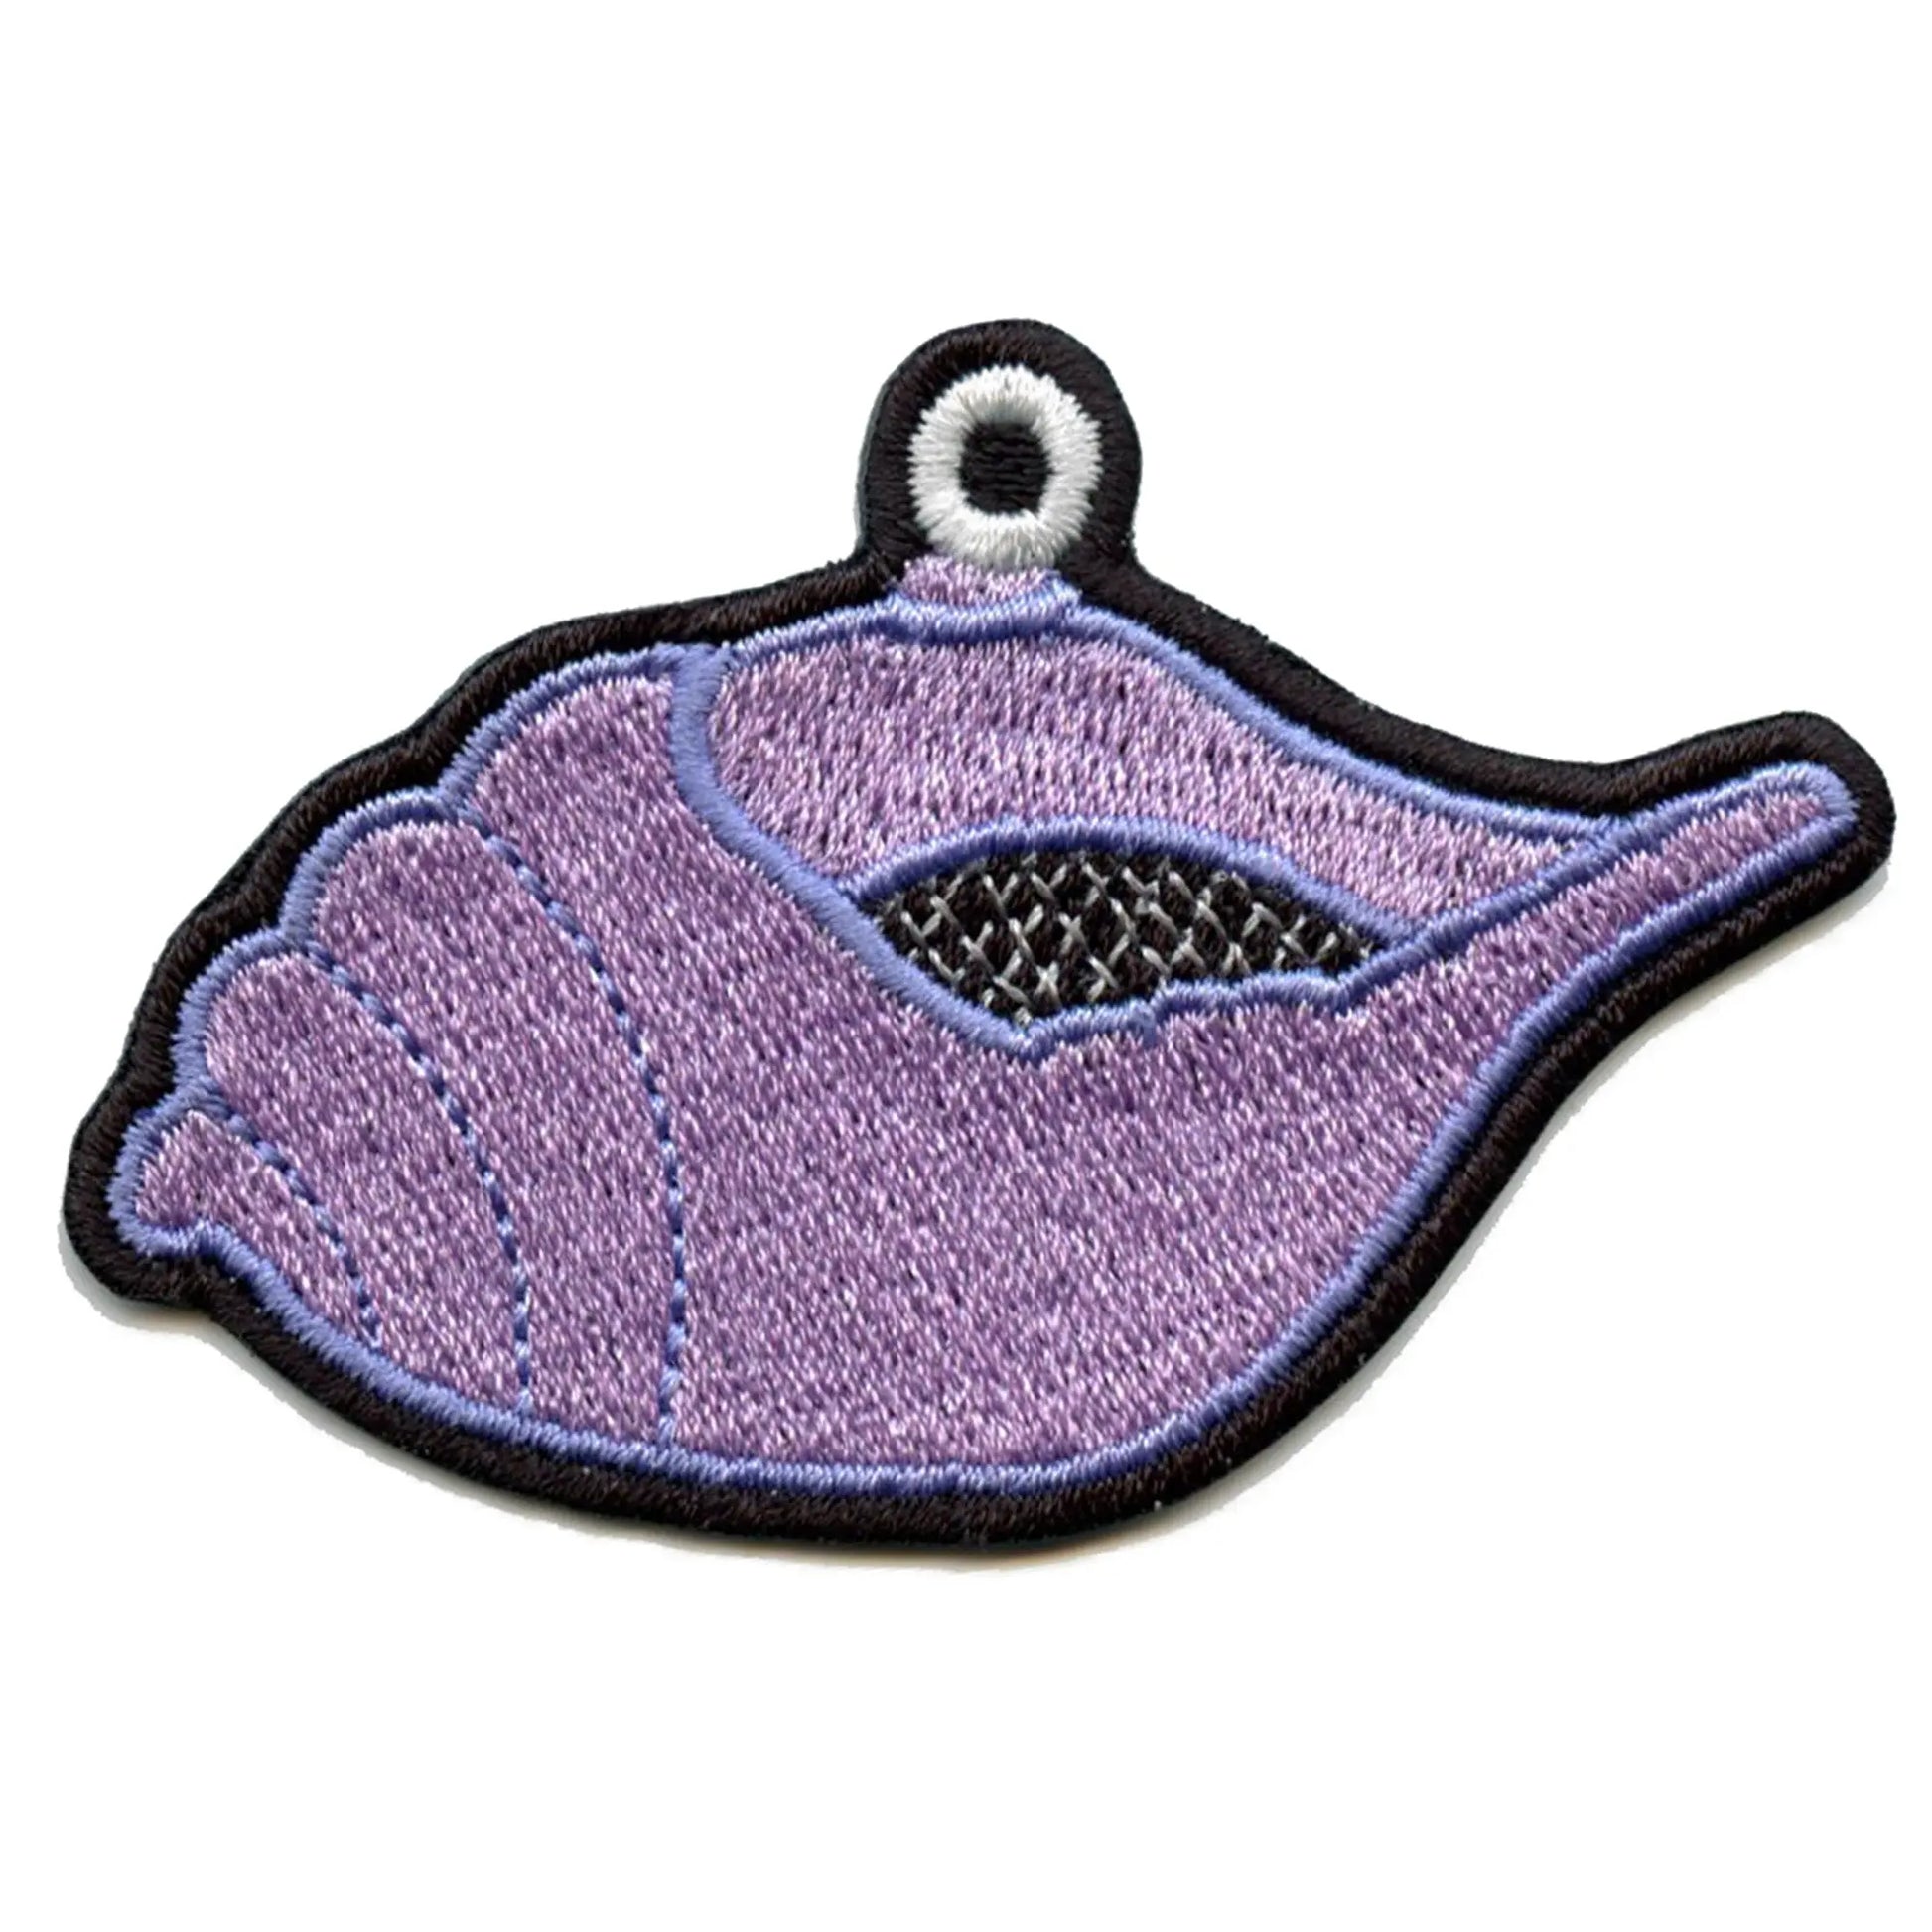 Mystical Talking Purple Conch Shell Patch Sponge TV Cartoon Embroidered Iron On